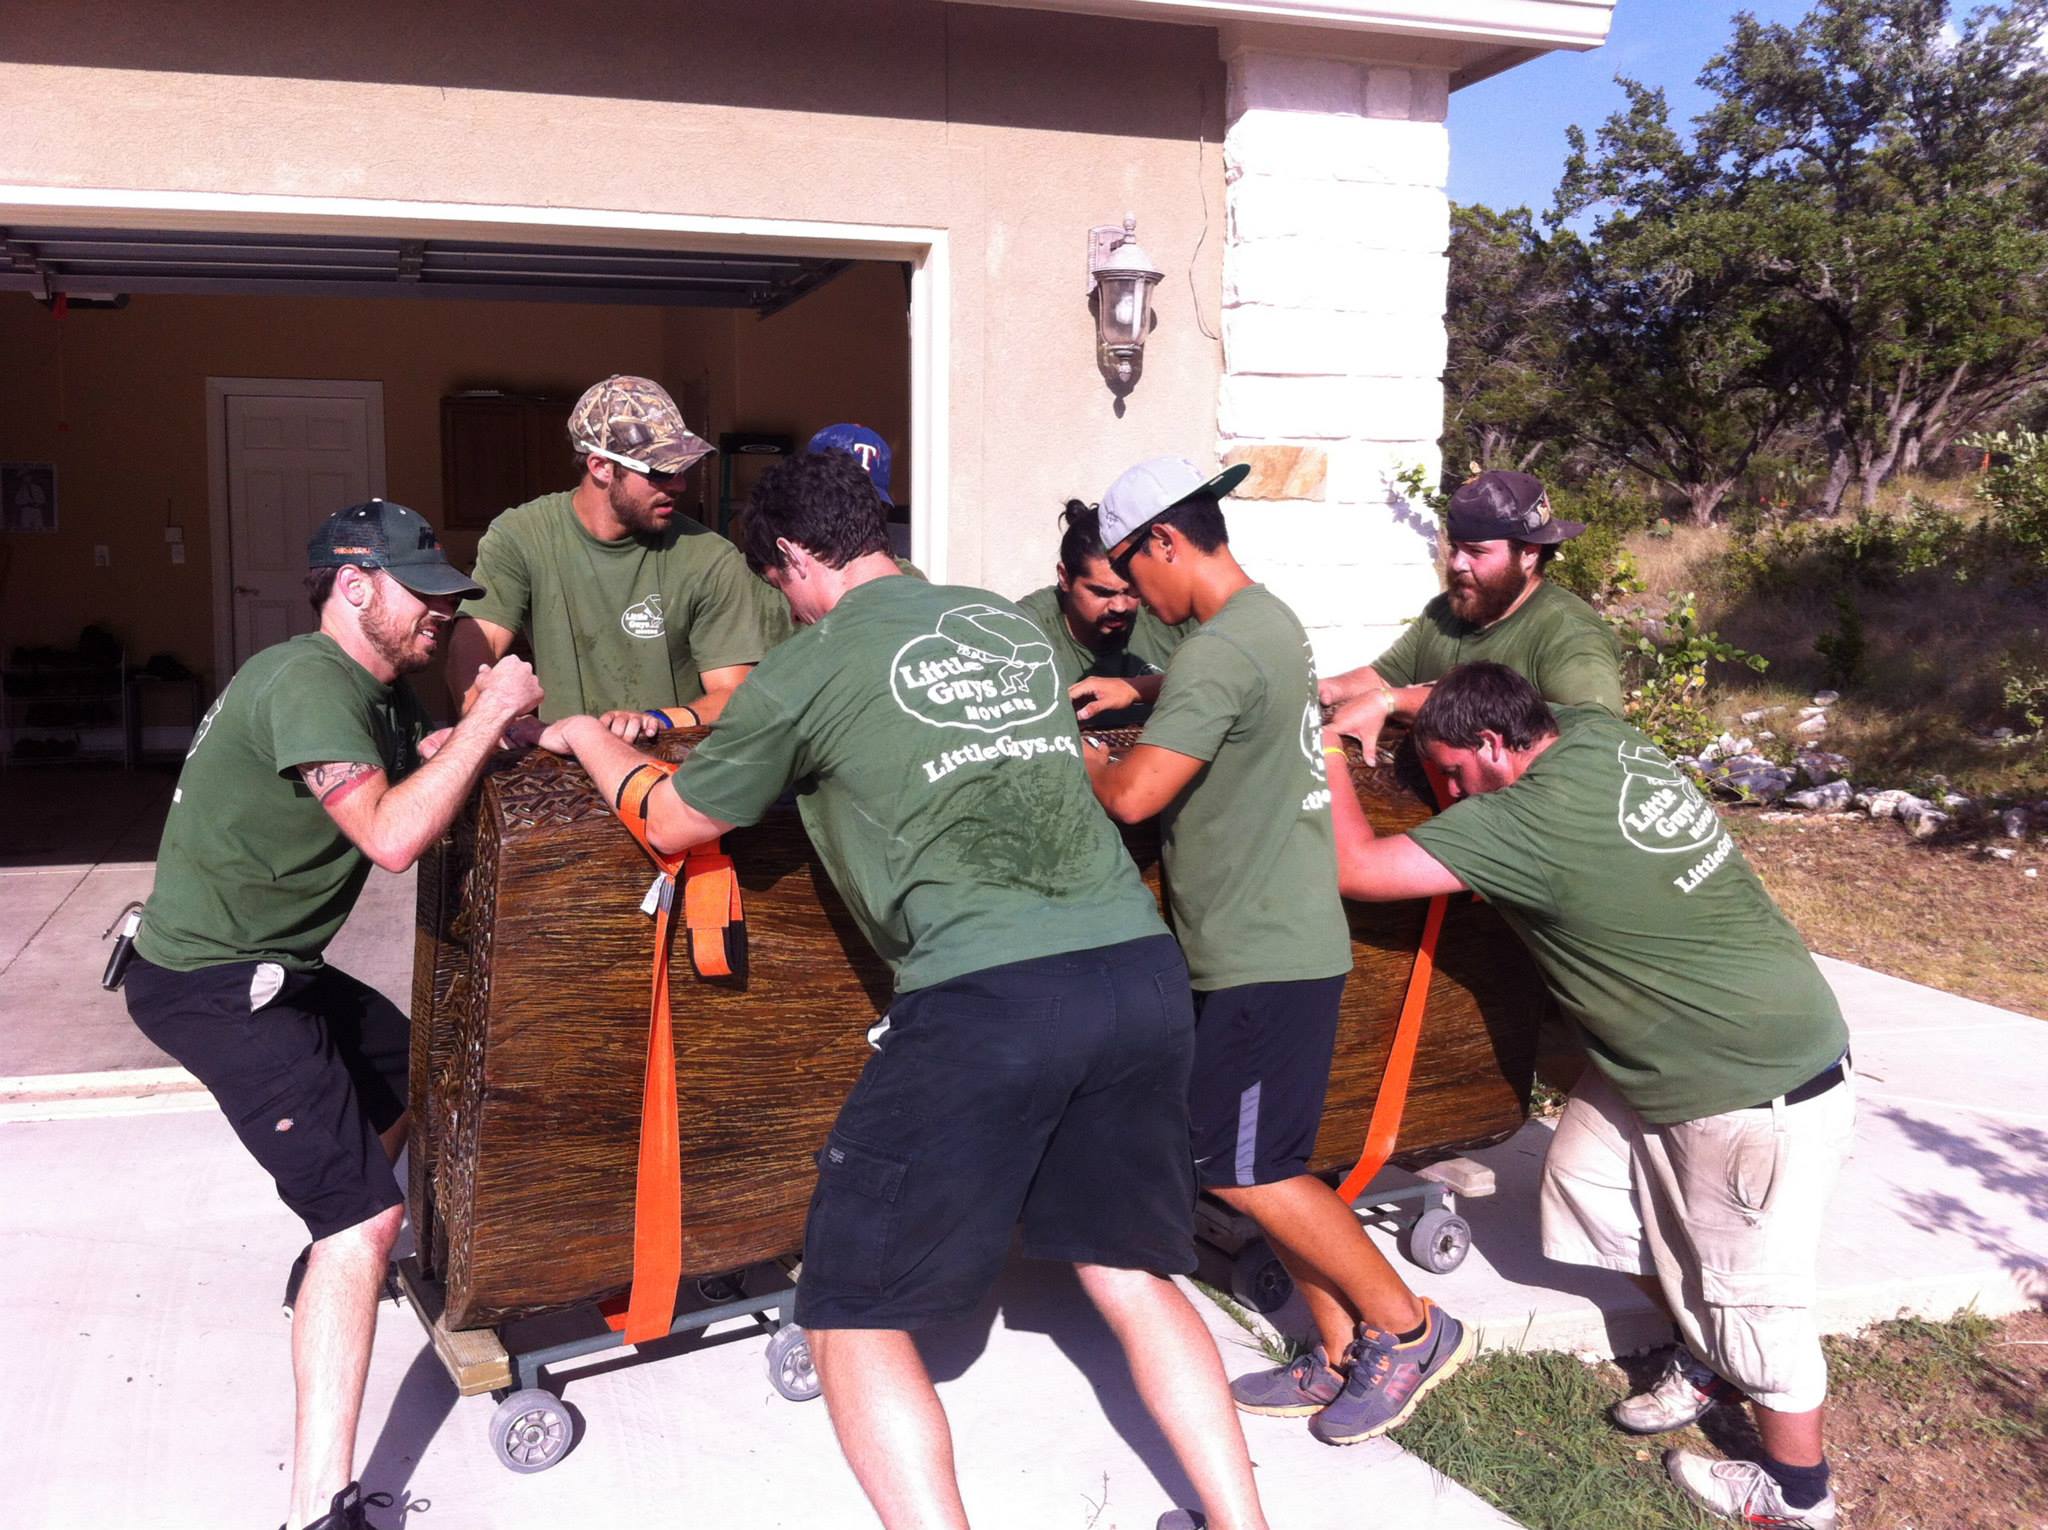 Movers in San Marcos working together